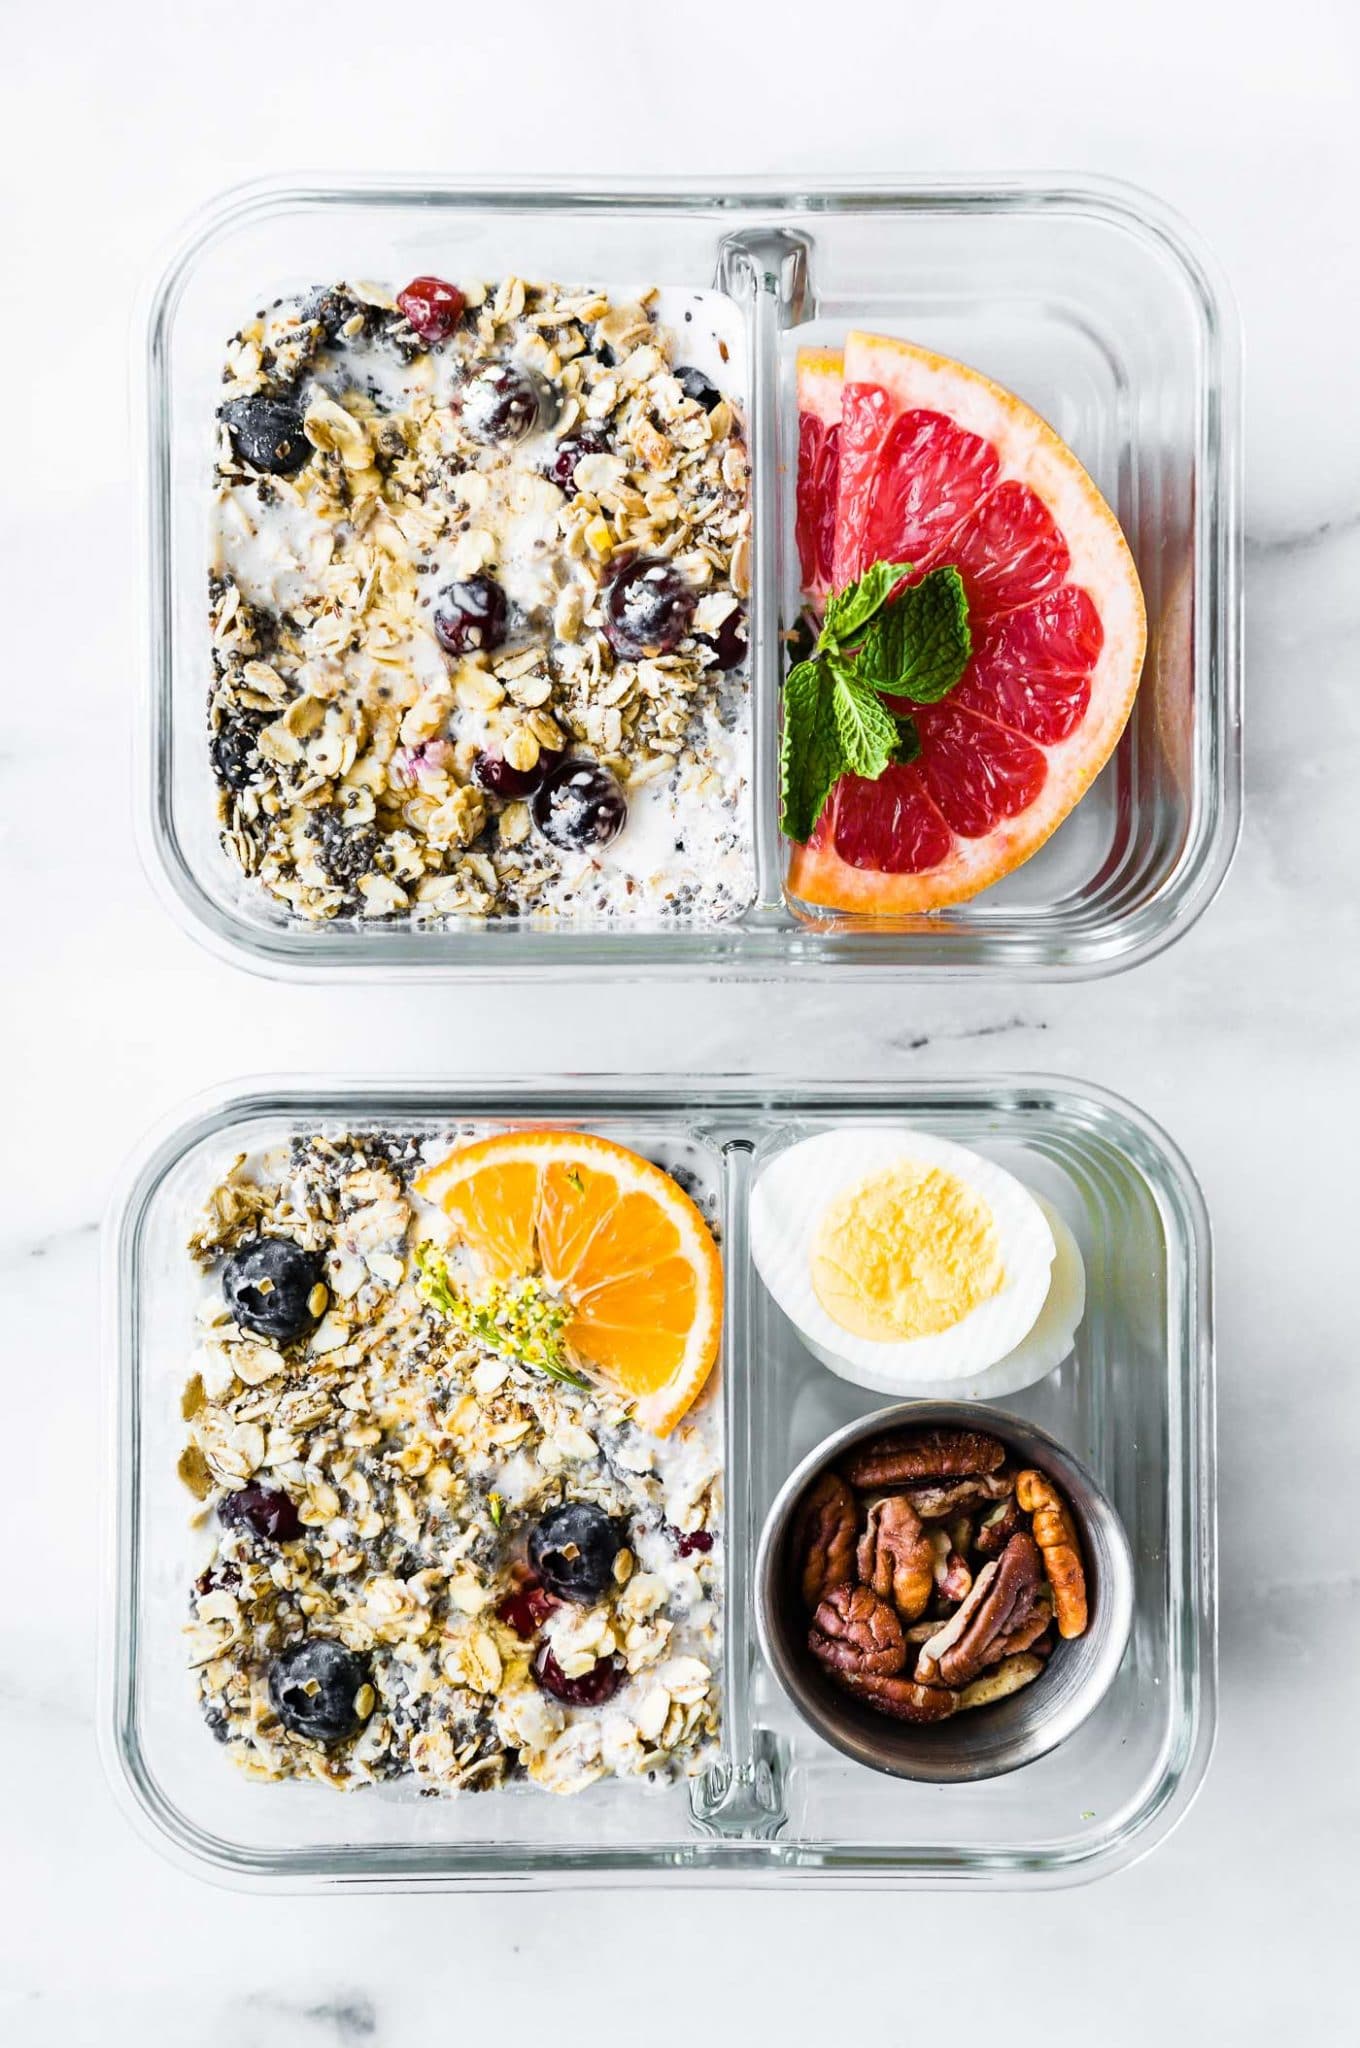 https://www.cottercrunch.com/wp-content/uploads/2018/12/blueberry-ovenight-breakfast-meal-prep-containers-scaled.jpg